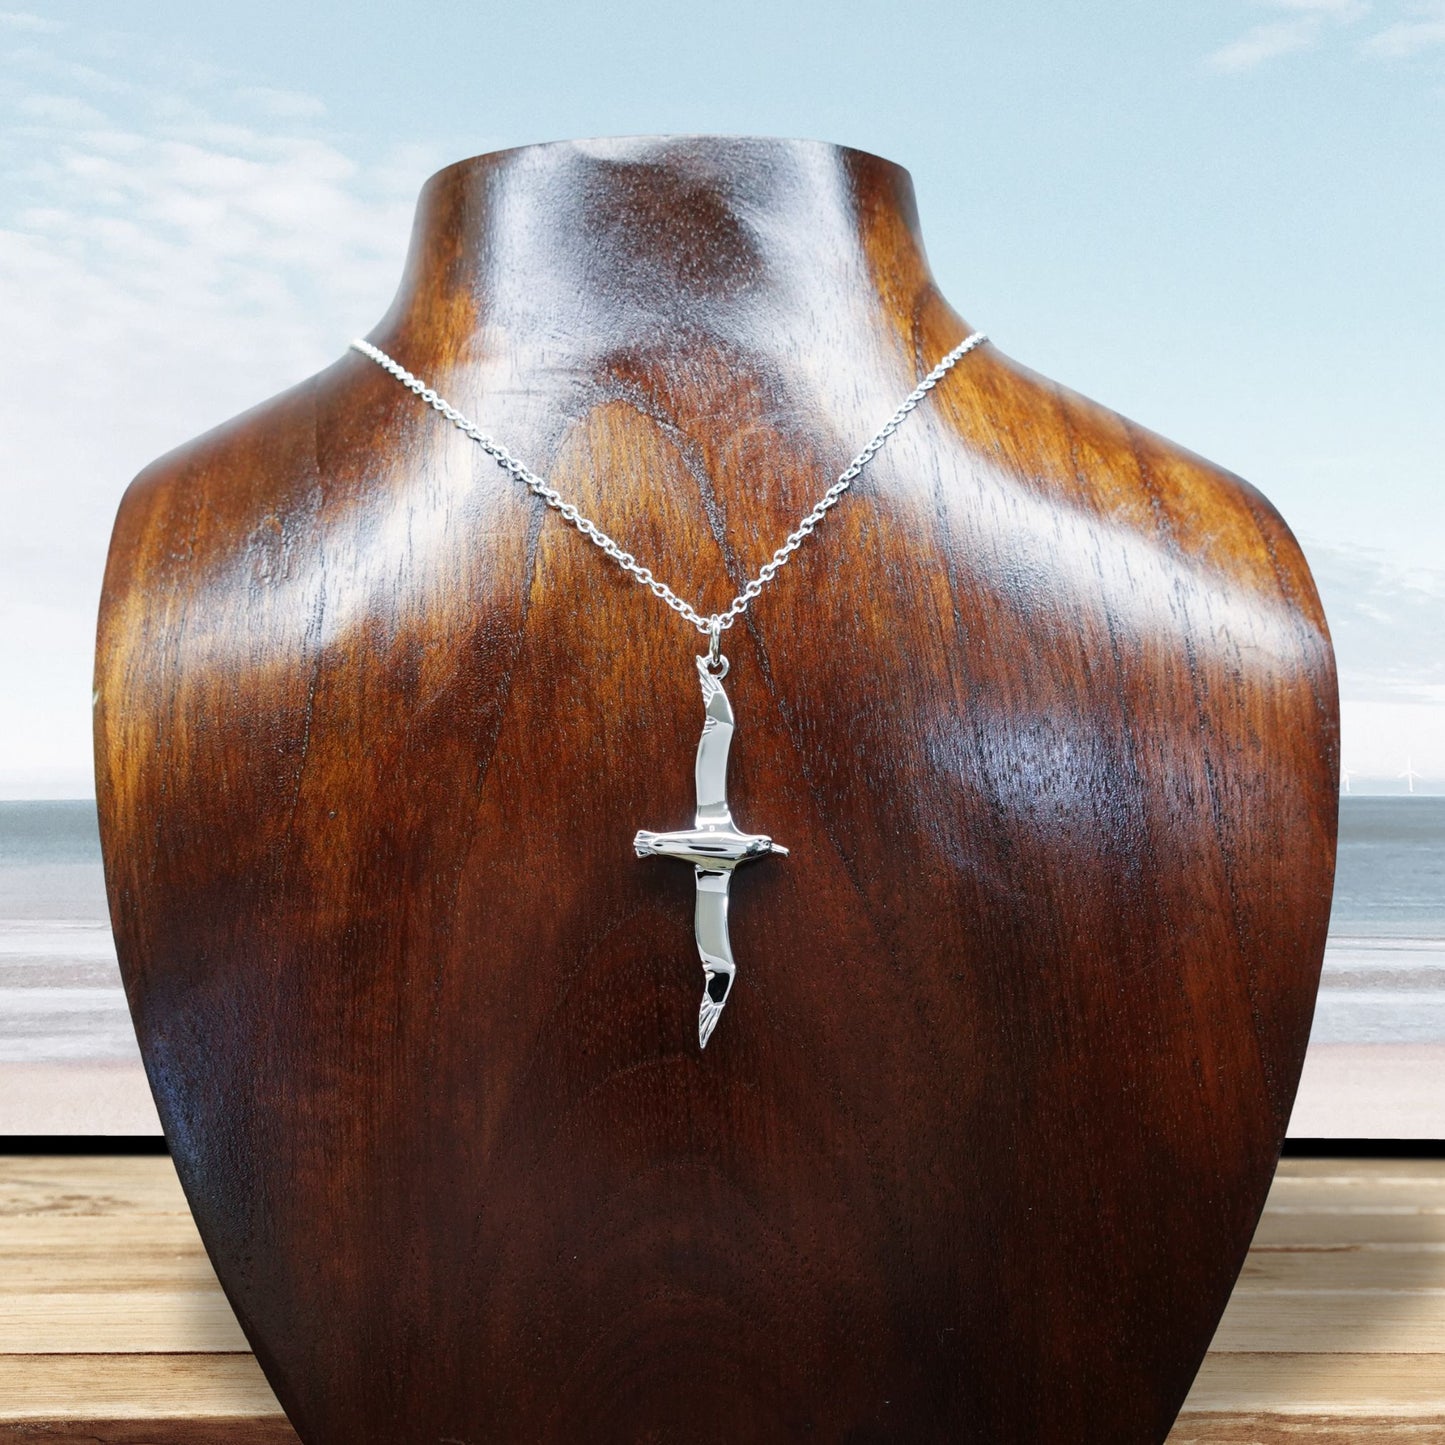 Albatross necklace. Made from highly polished, tarnish resistant silver, hung on a solid silver chain. © Adrian Ashley